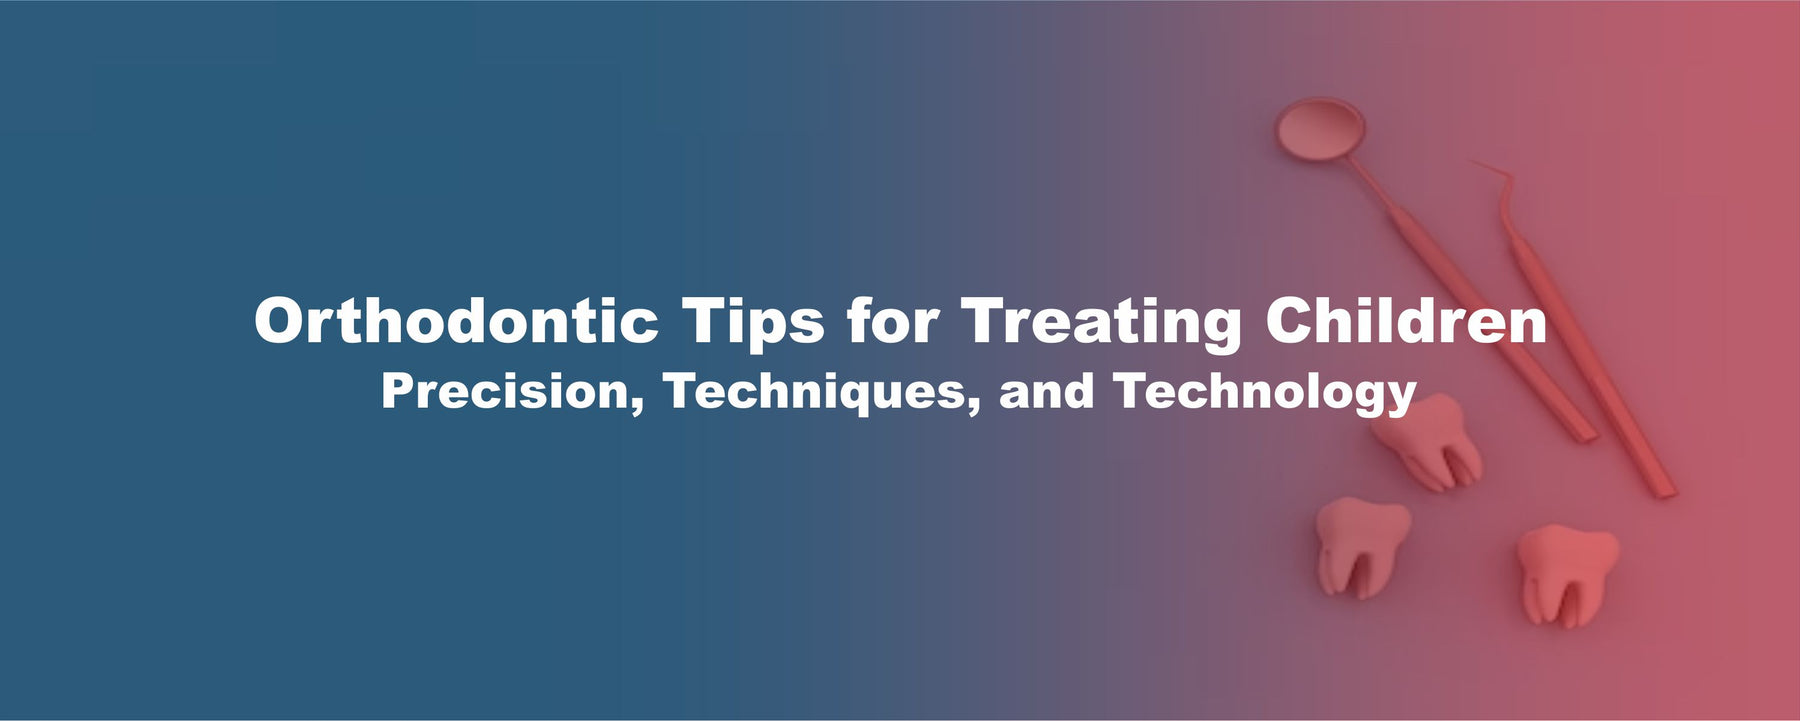 Orthodontic Tips for Treating Children: Precision, Techniques, and Technology